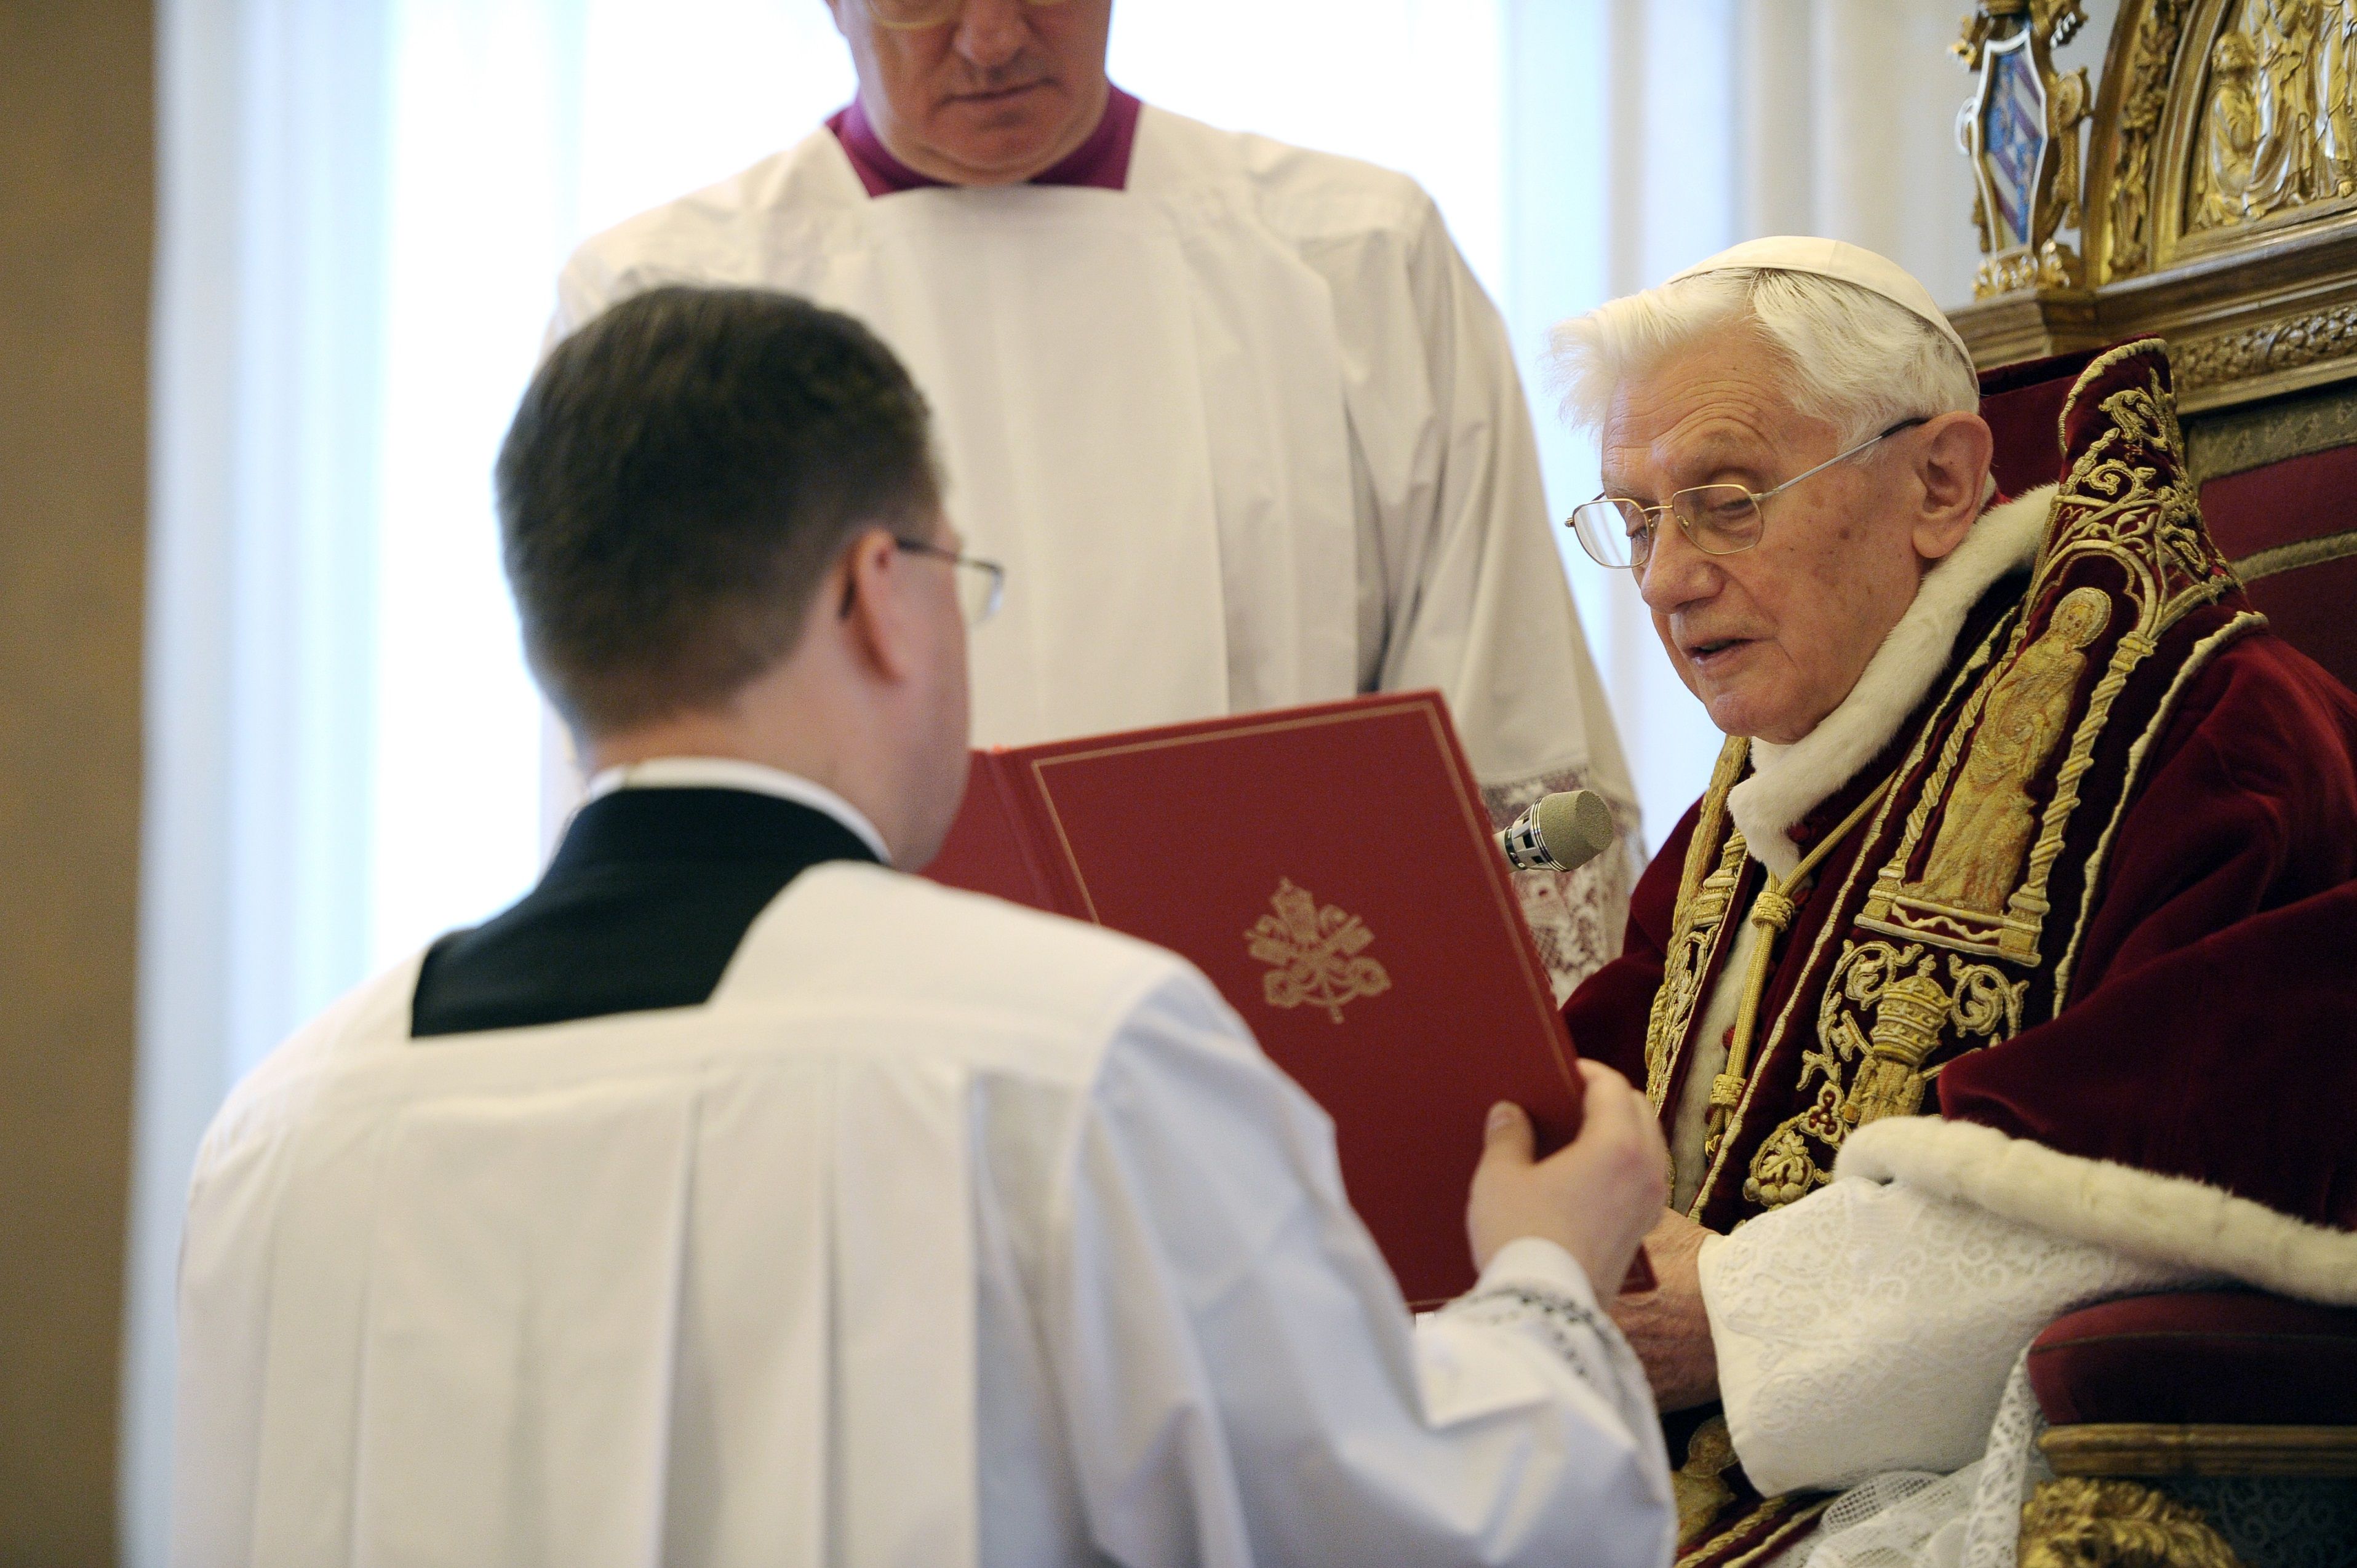 In stepping down, Benedict XVI carved out new role as ‘contemplative’ pope